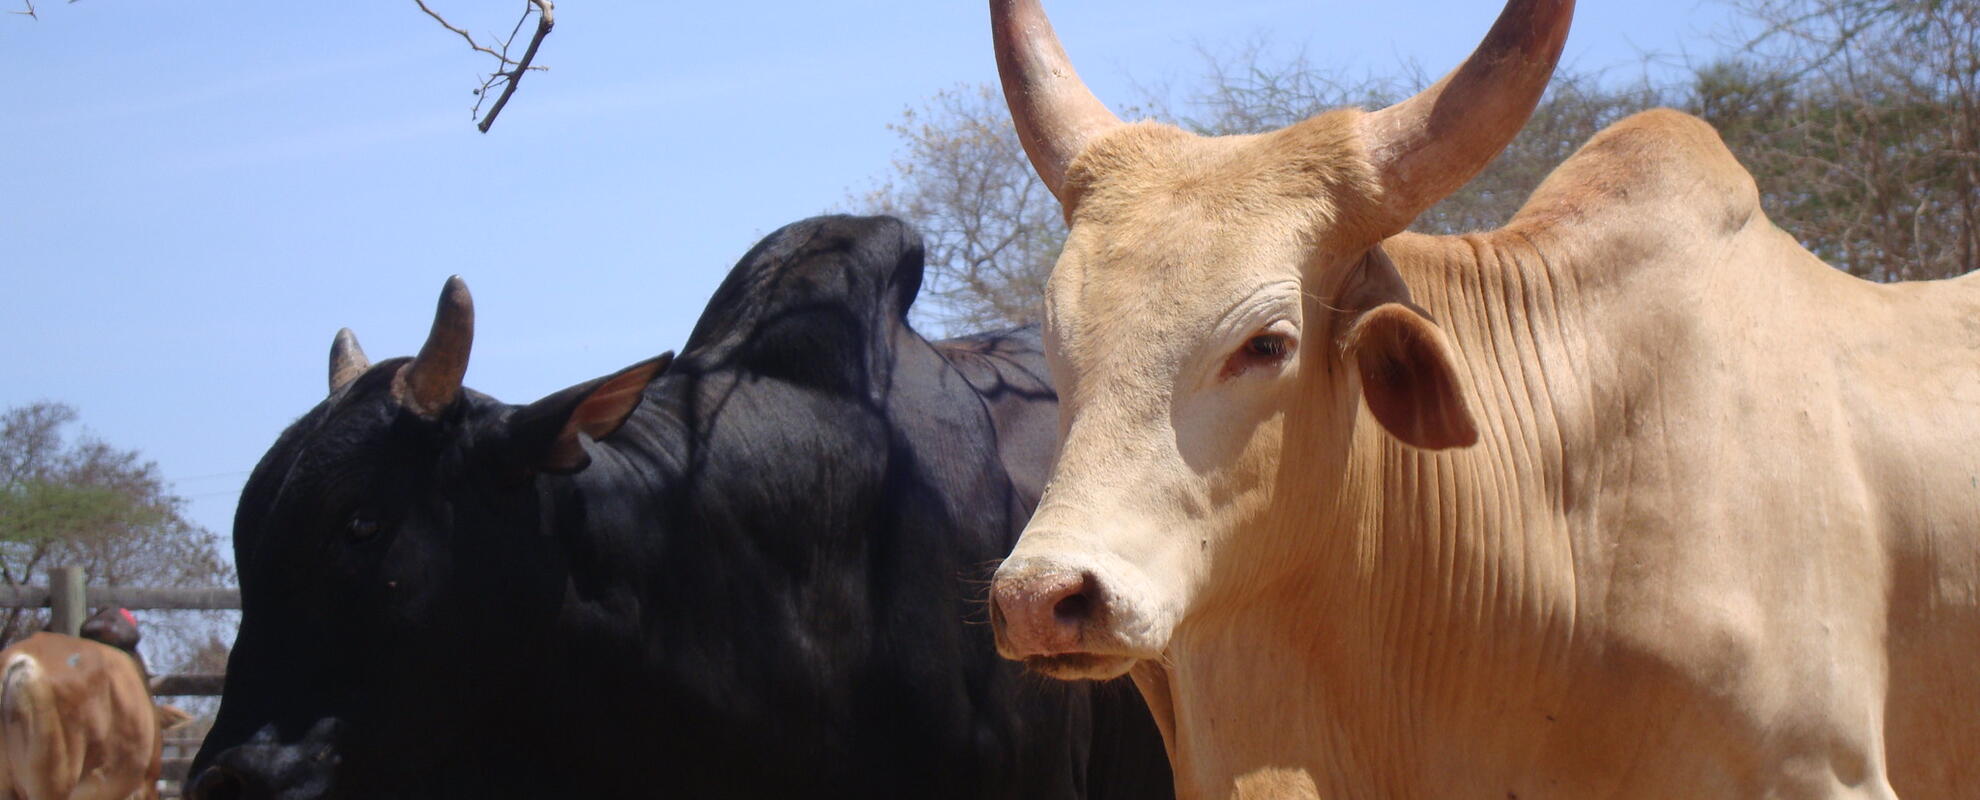 EnviroCow: Reducing feed costs and GHG emission in smallholder dairy cattle in SSA